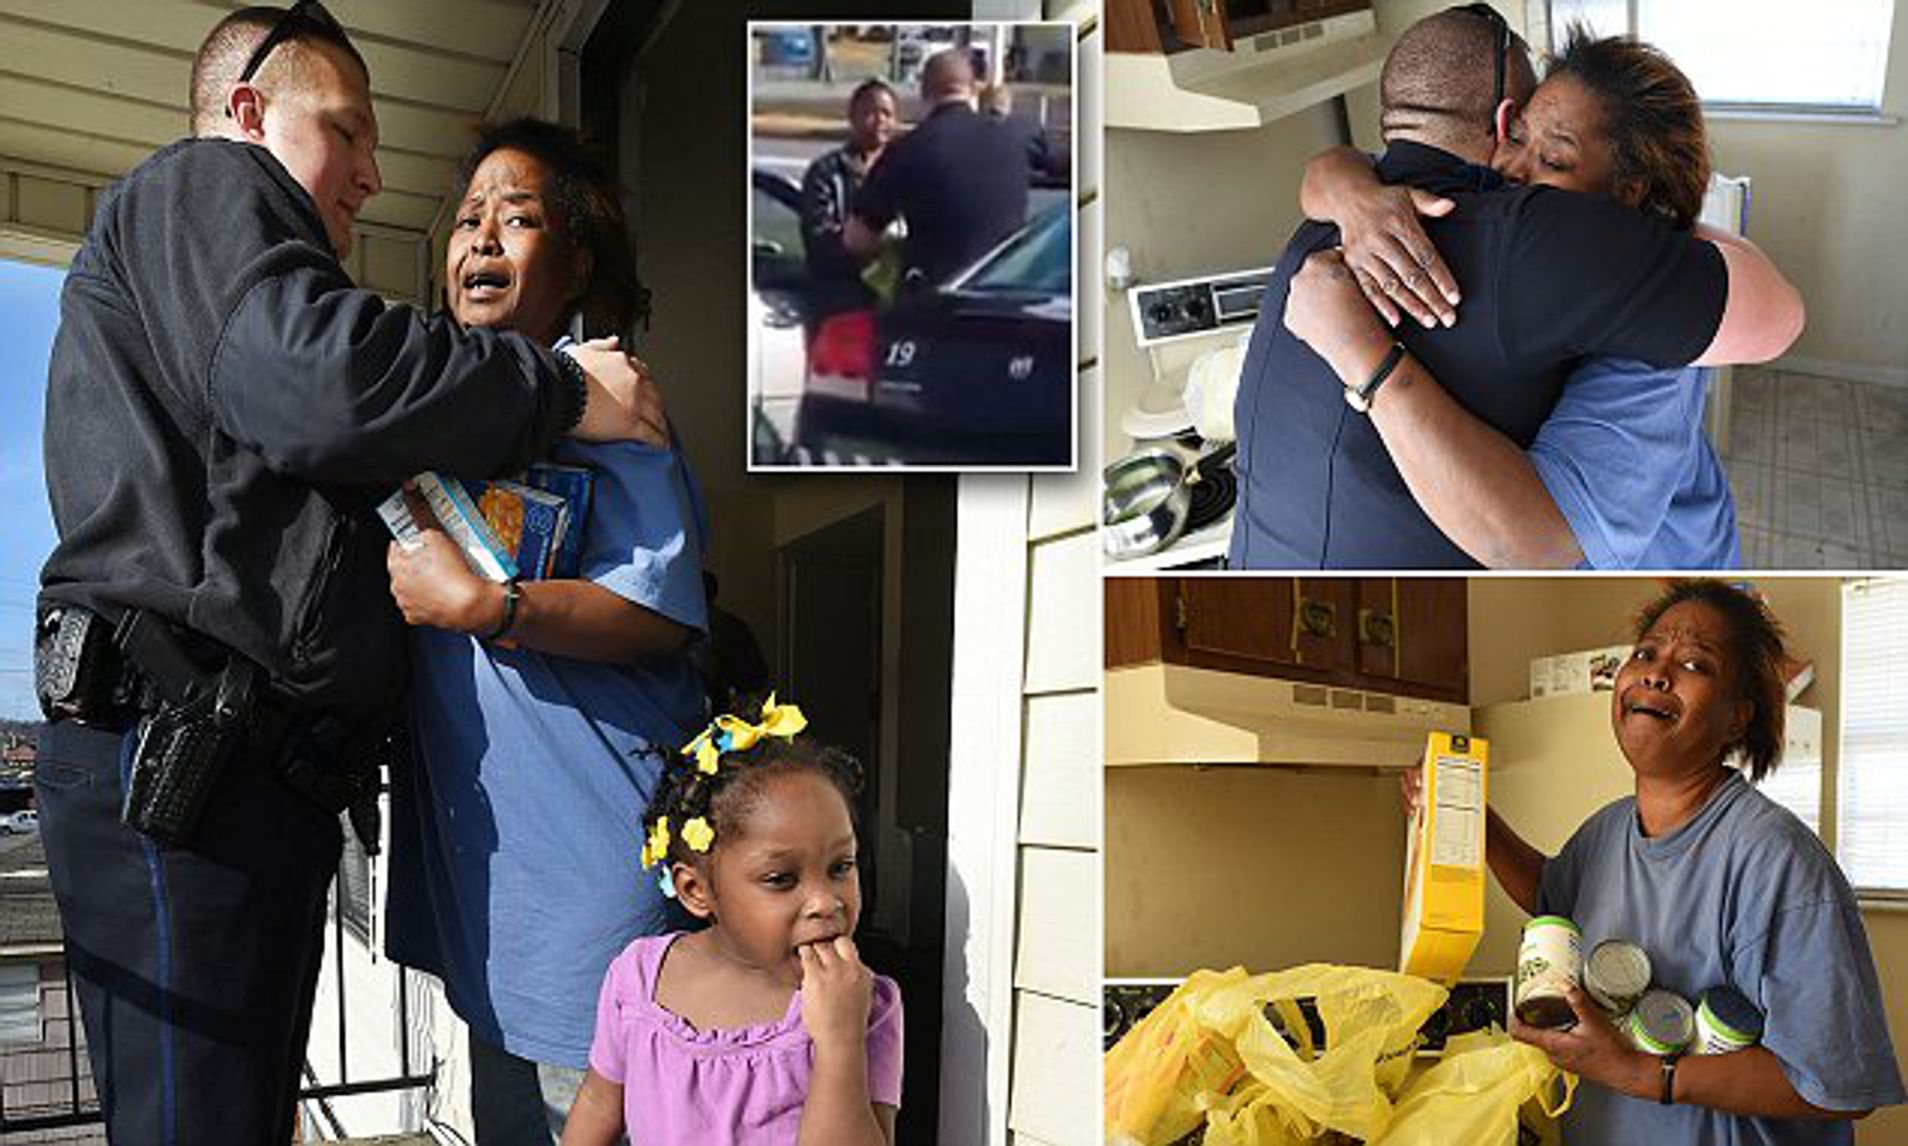 Instead Of Arresting Woman Who Stole 5 Eggs To Feed Her Family, Cop Brought Her 2 Truckloads Of Food